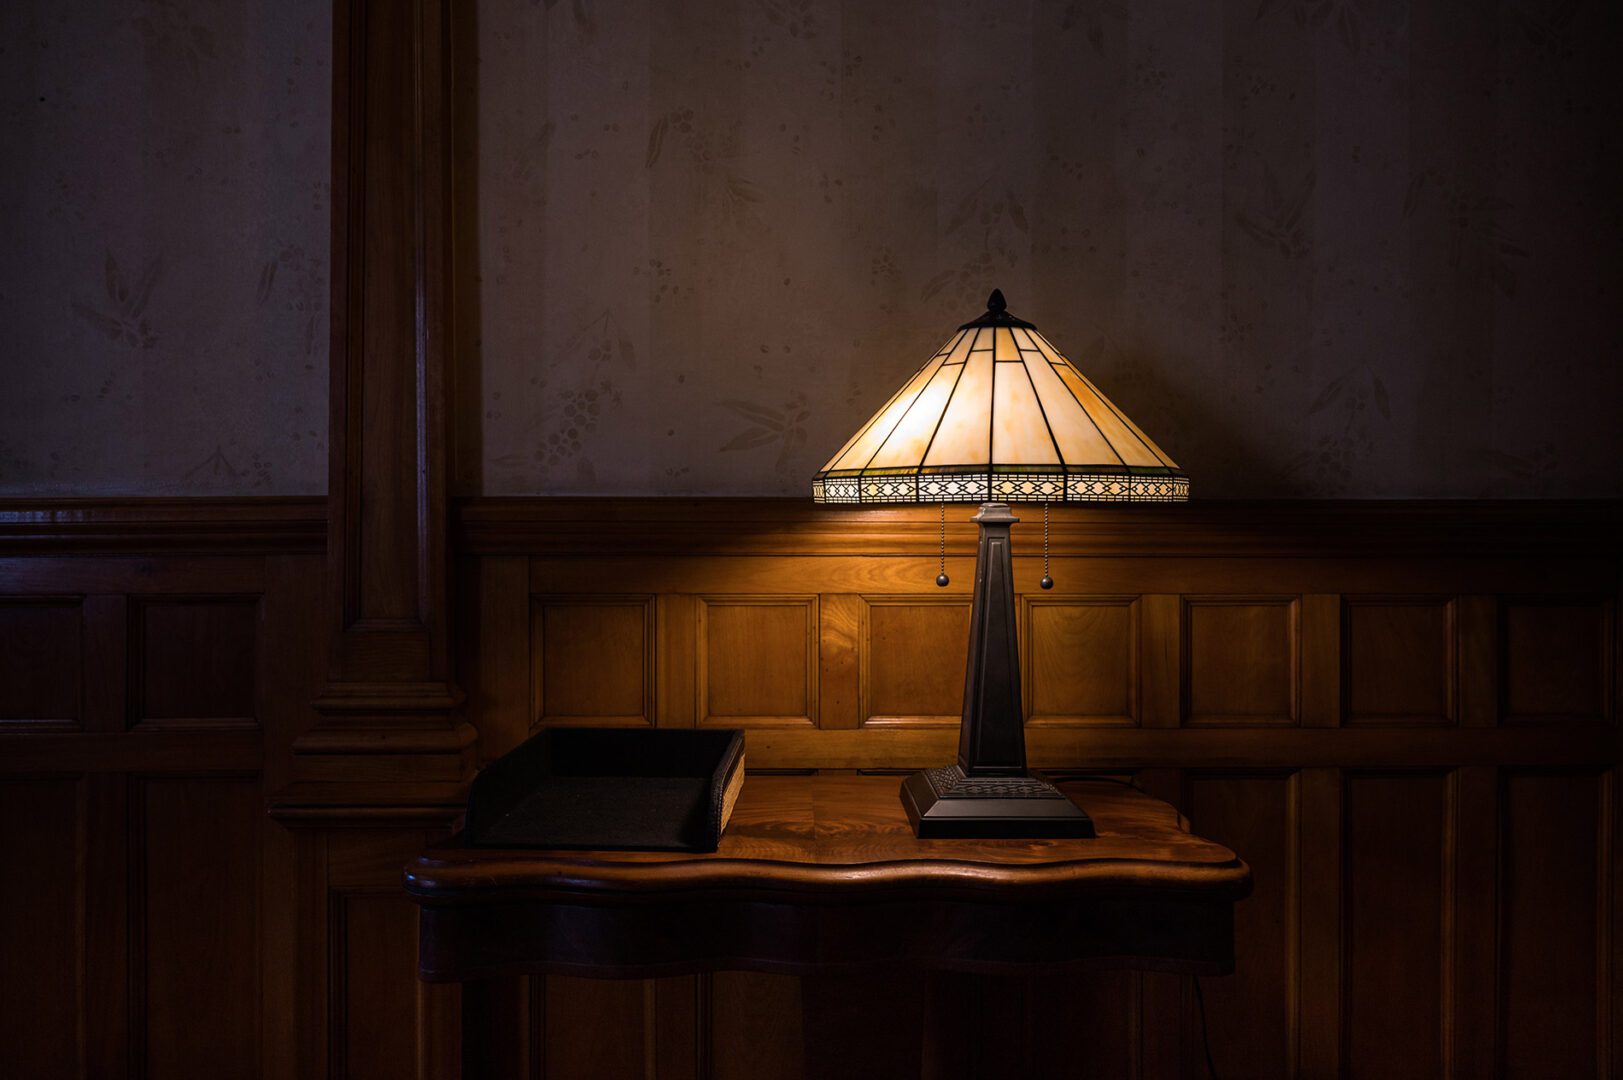 Stained glass lamp glowing with warm-colored light in dark room with wood paneling